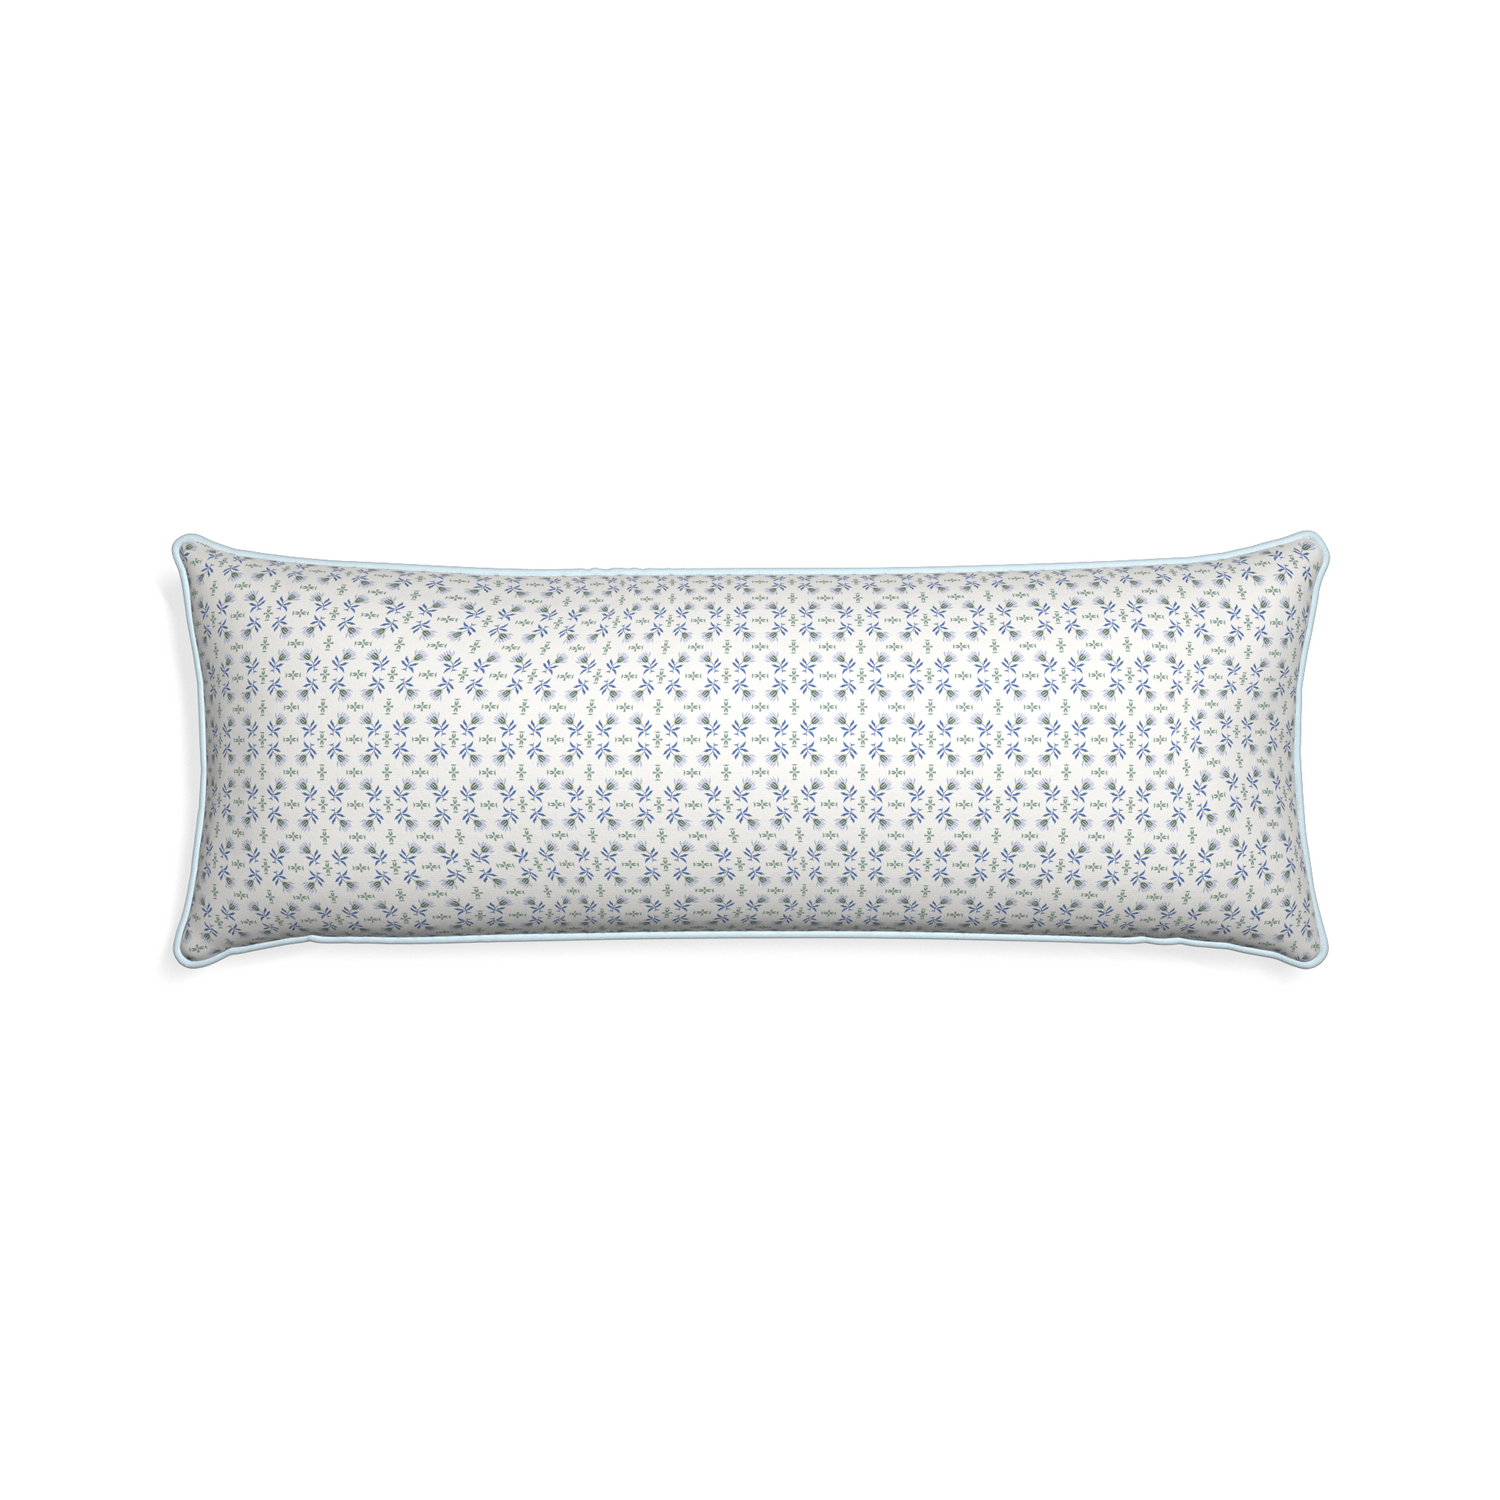 Xl-lumbar lee custom blue & green floralpillow with powder piping on white background